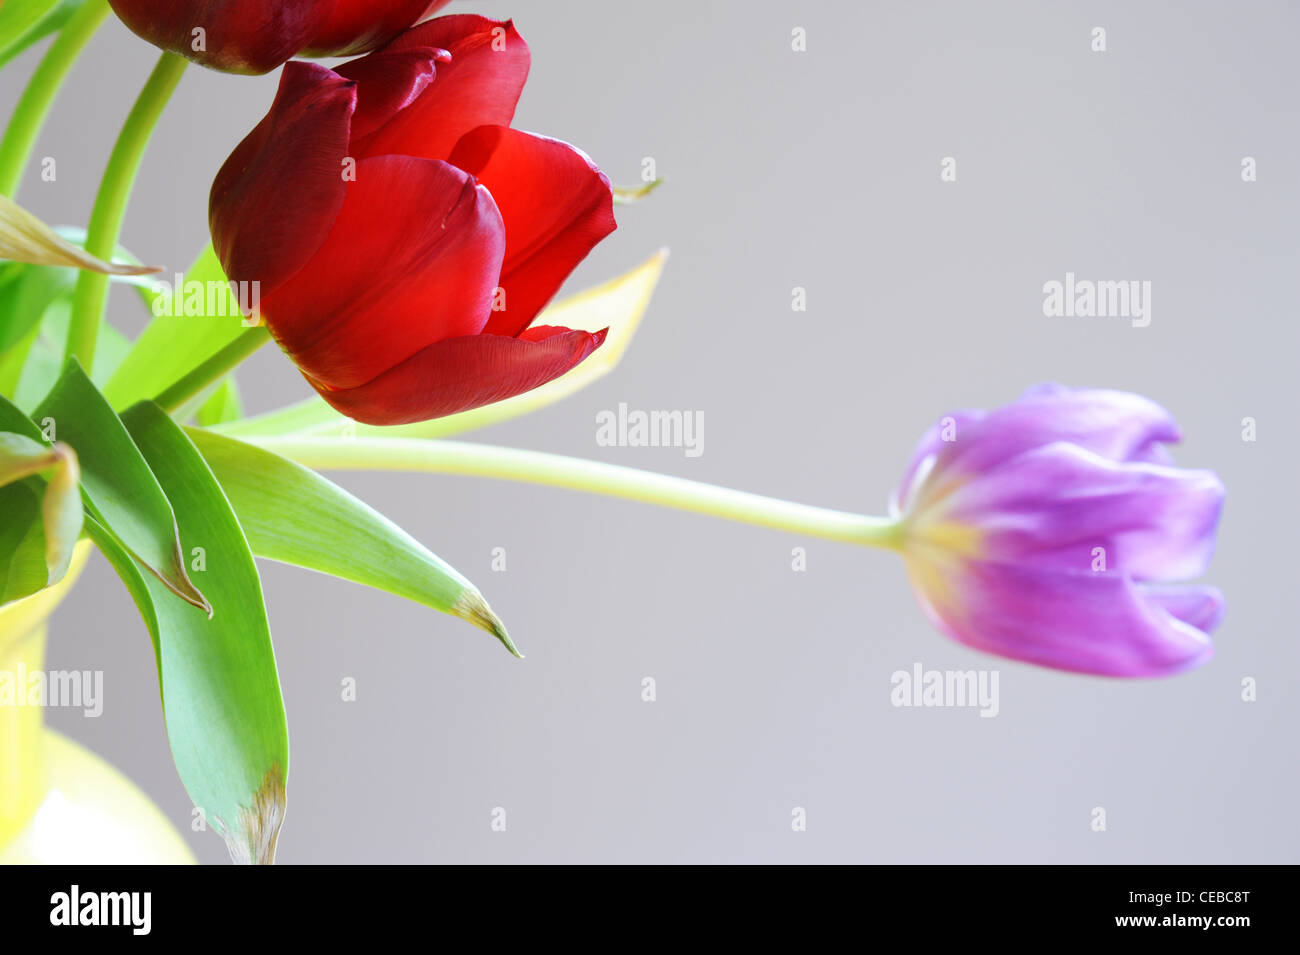 Tulips in a vase Stock Photo